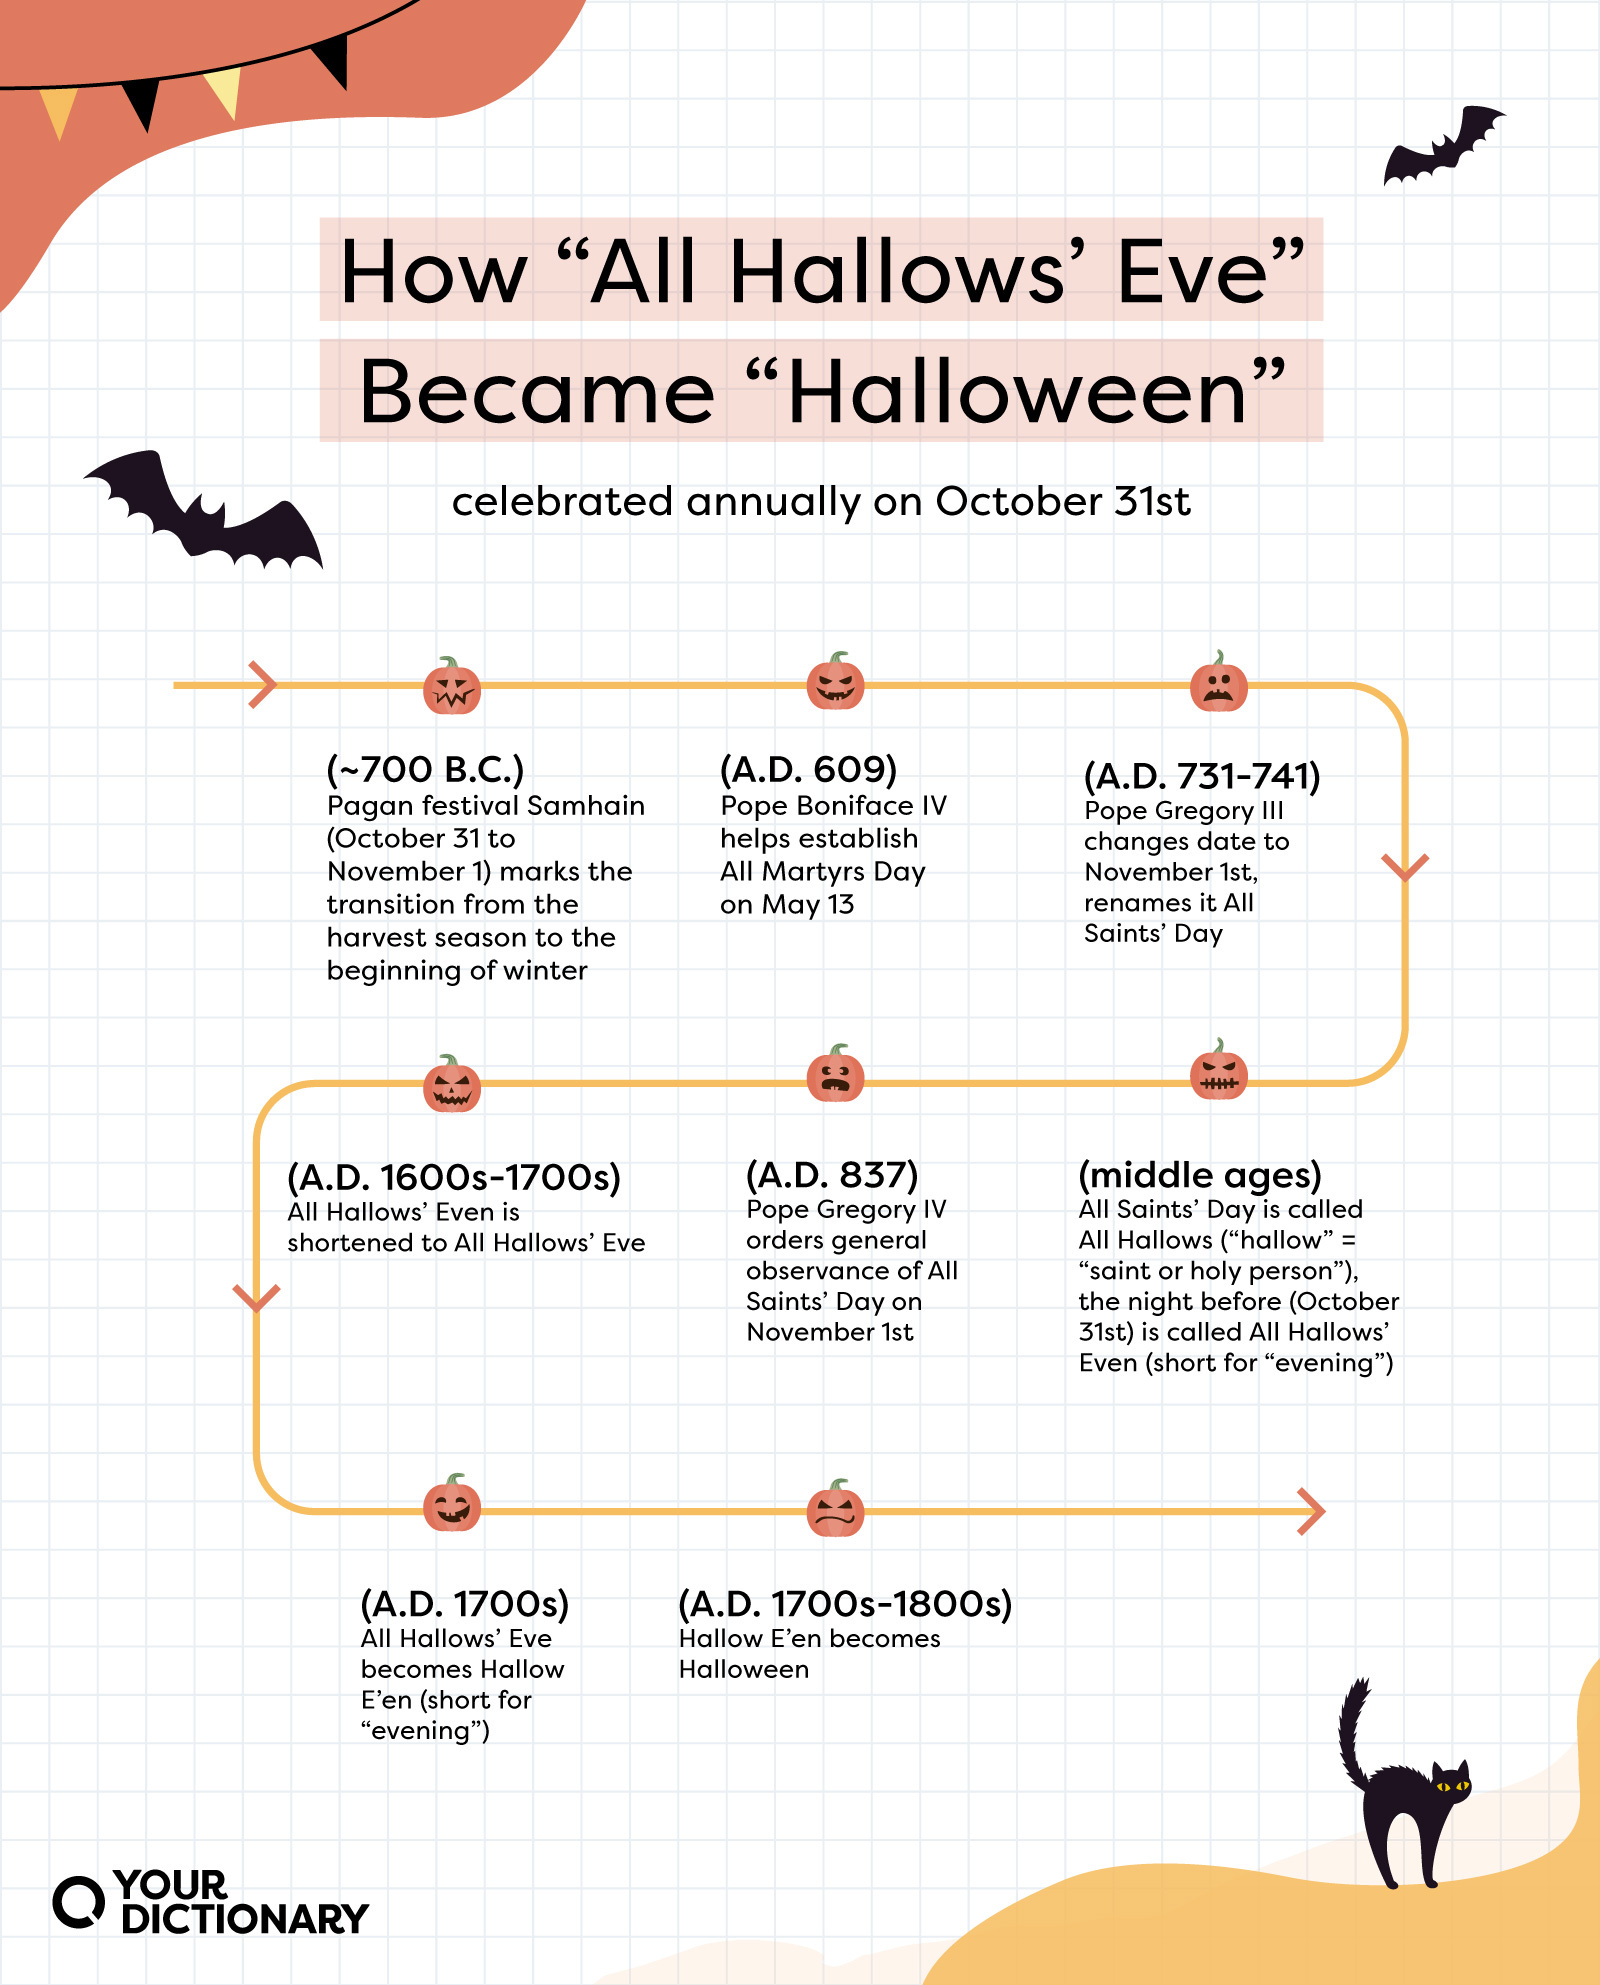 Timeline of events outlining how All Hallows' Eve became Halloween as detailed in the article.